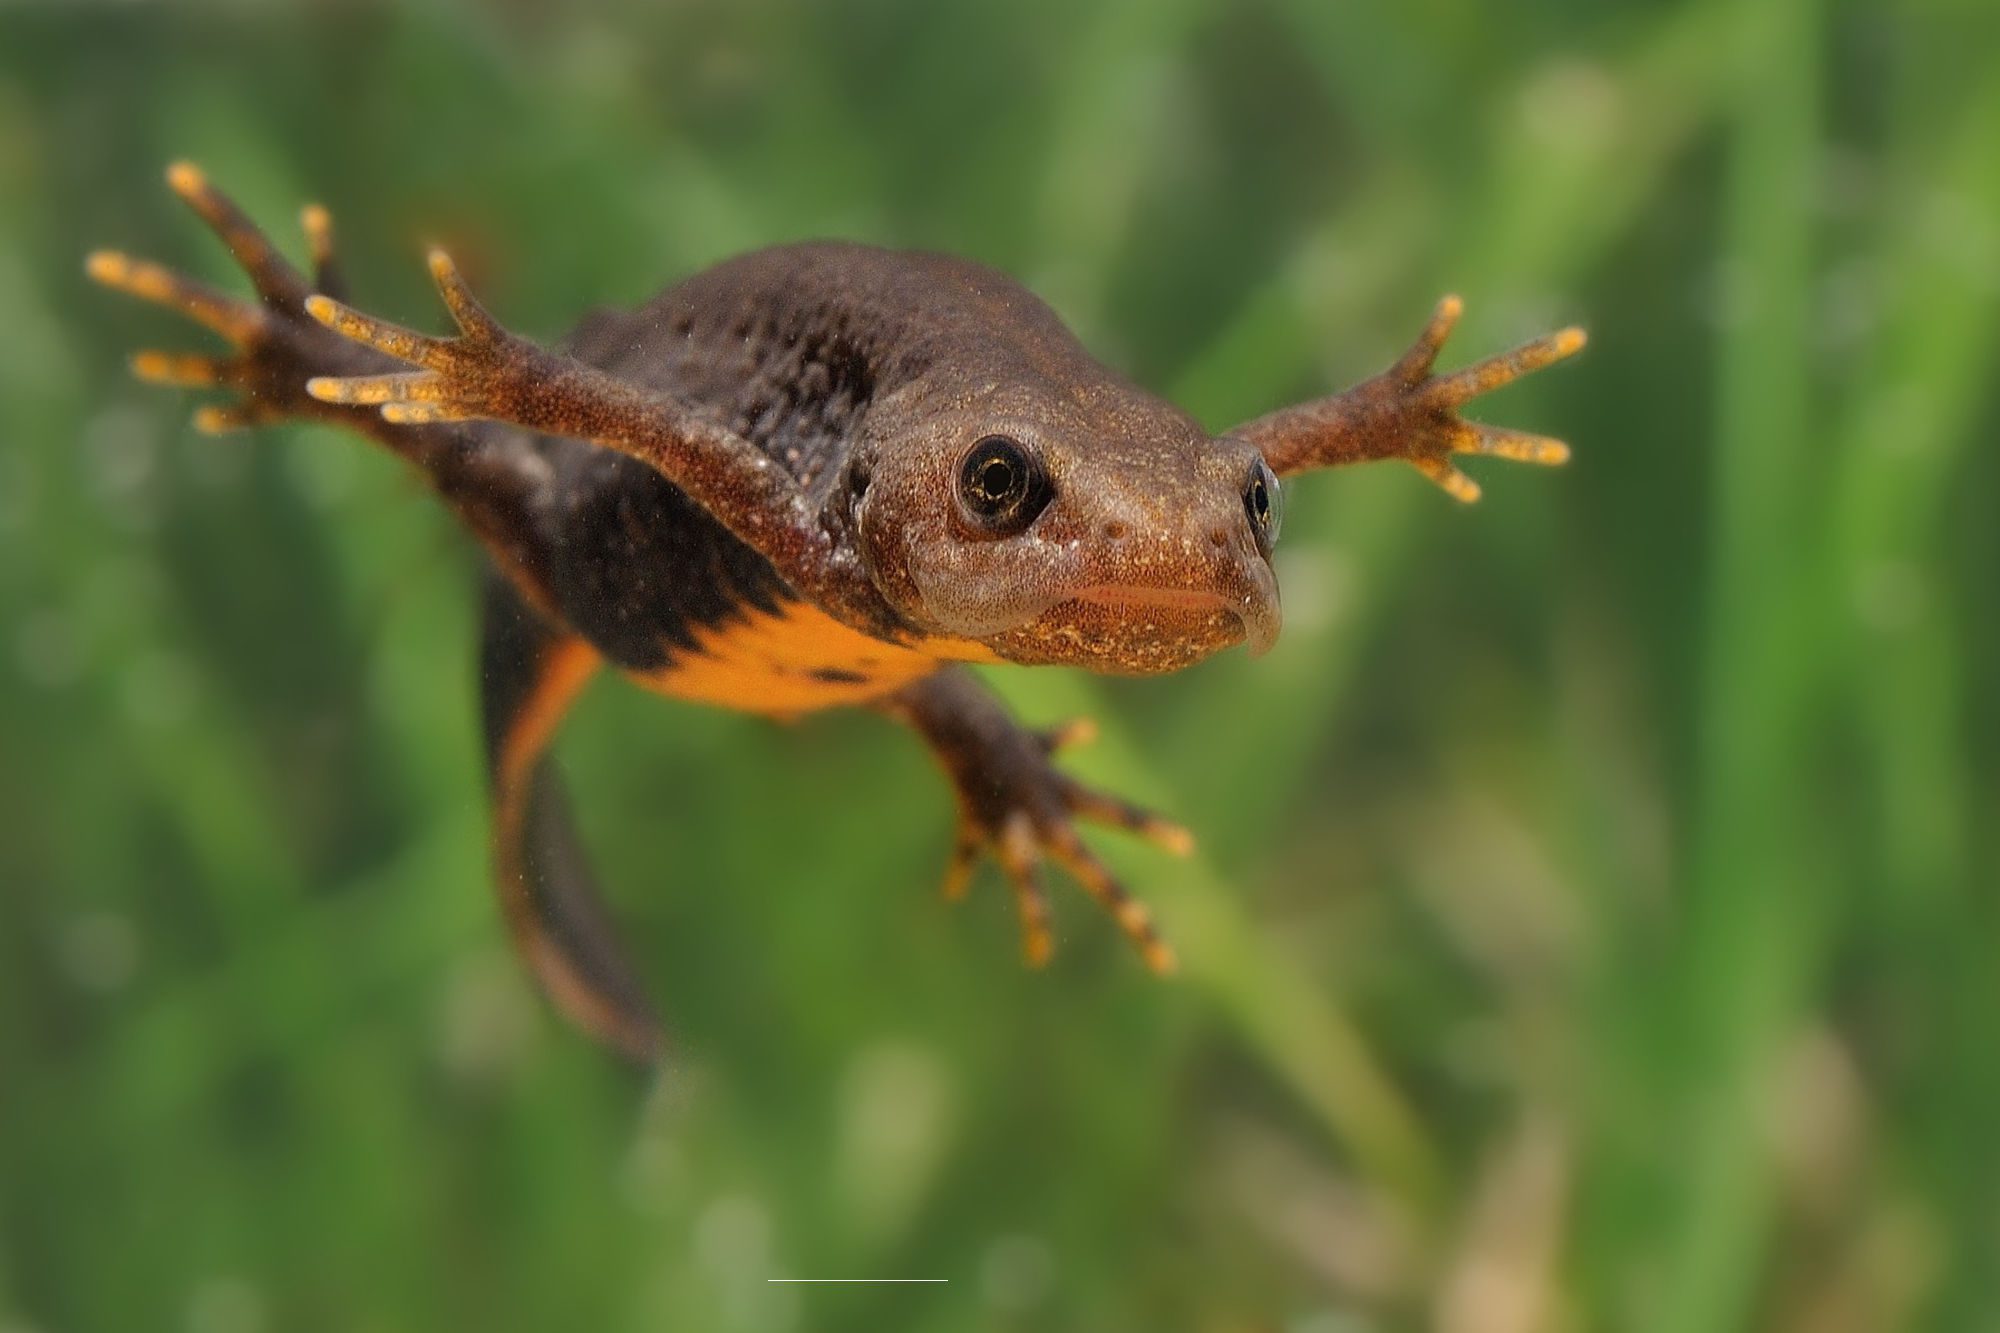 Great crested newt by phototrip.cz